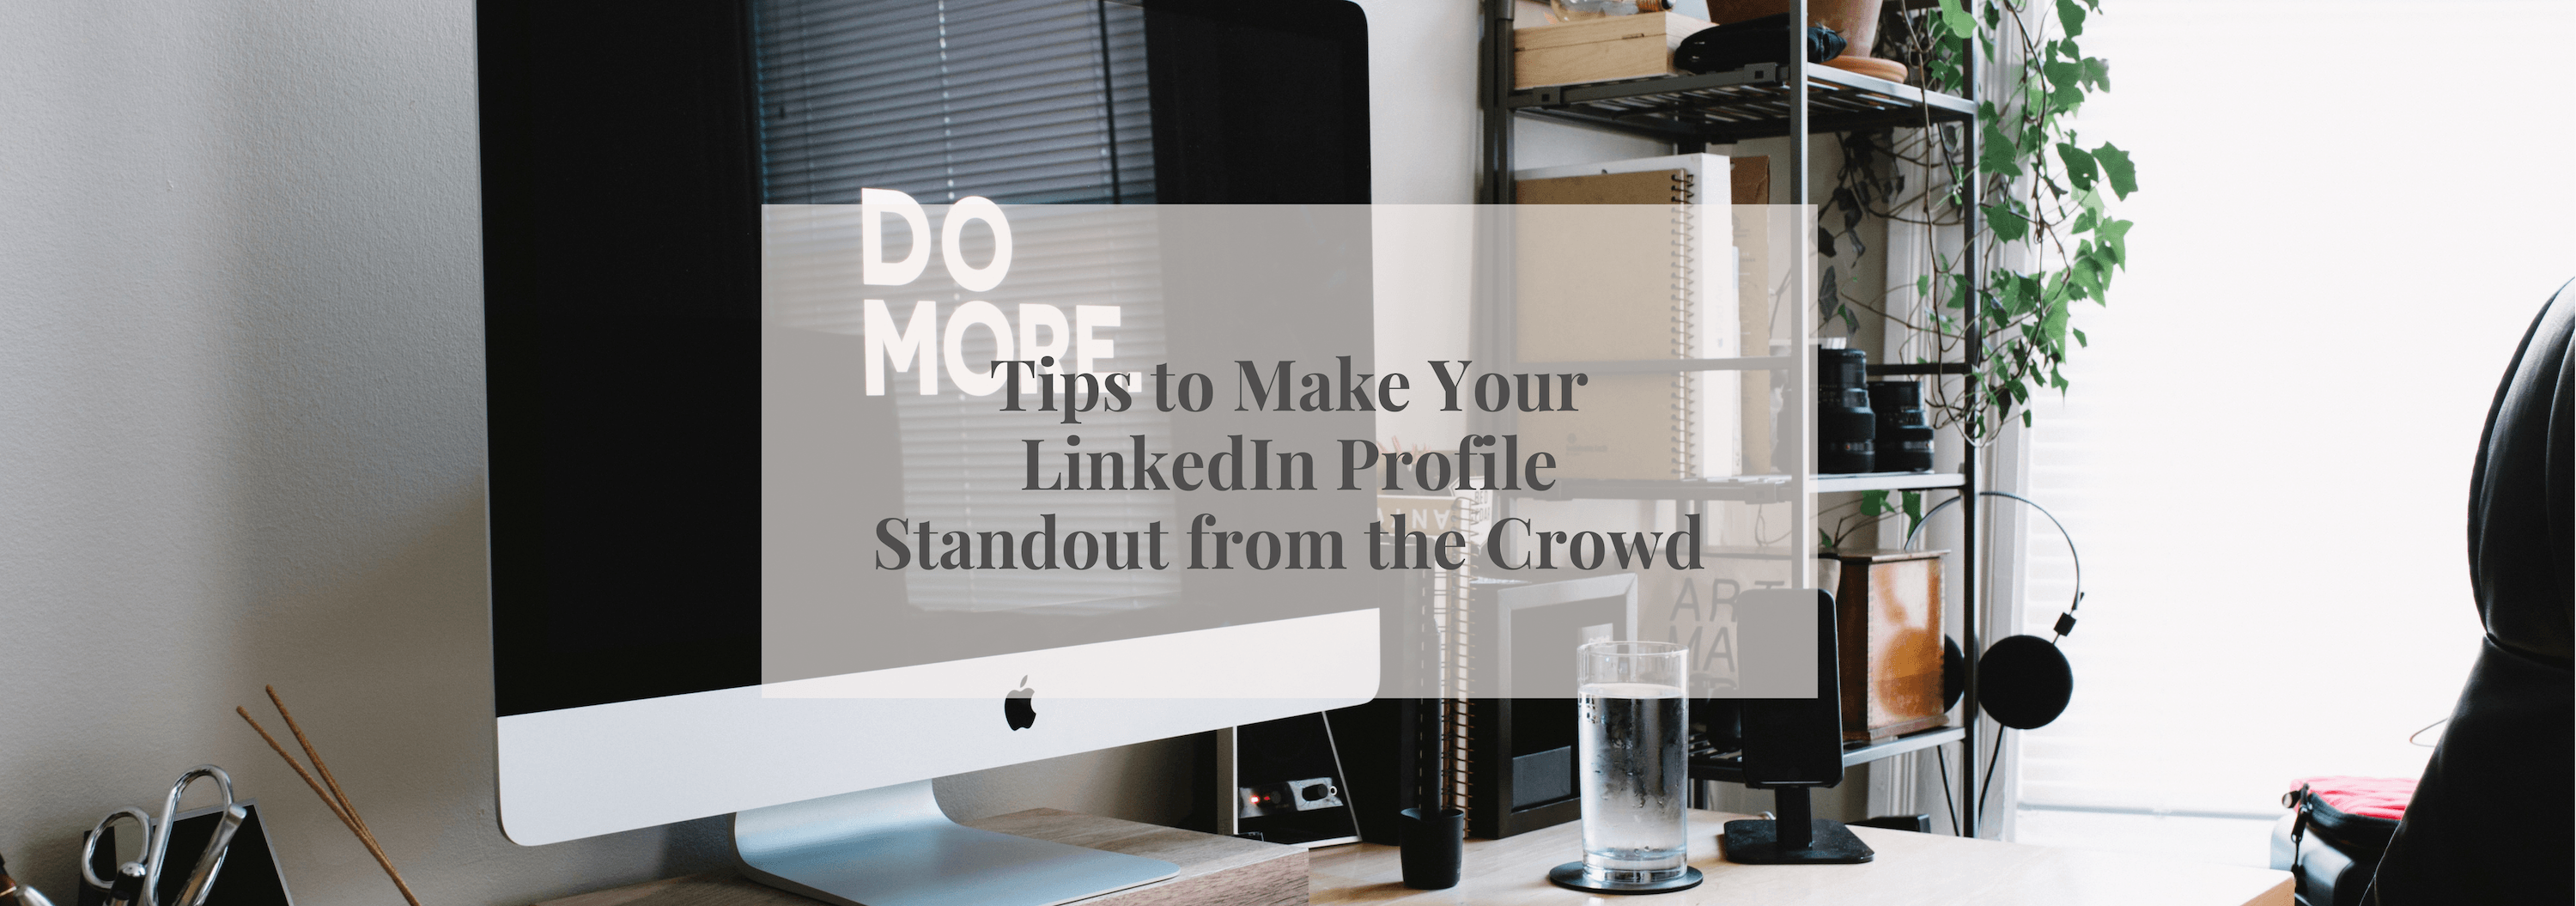 5 Tips to Make Your LinkedIn Profile Standout from the Crowd - Numi